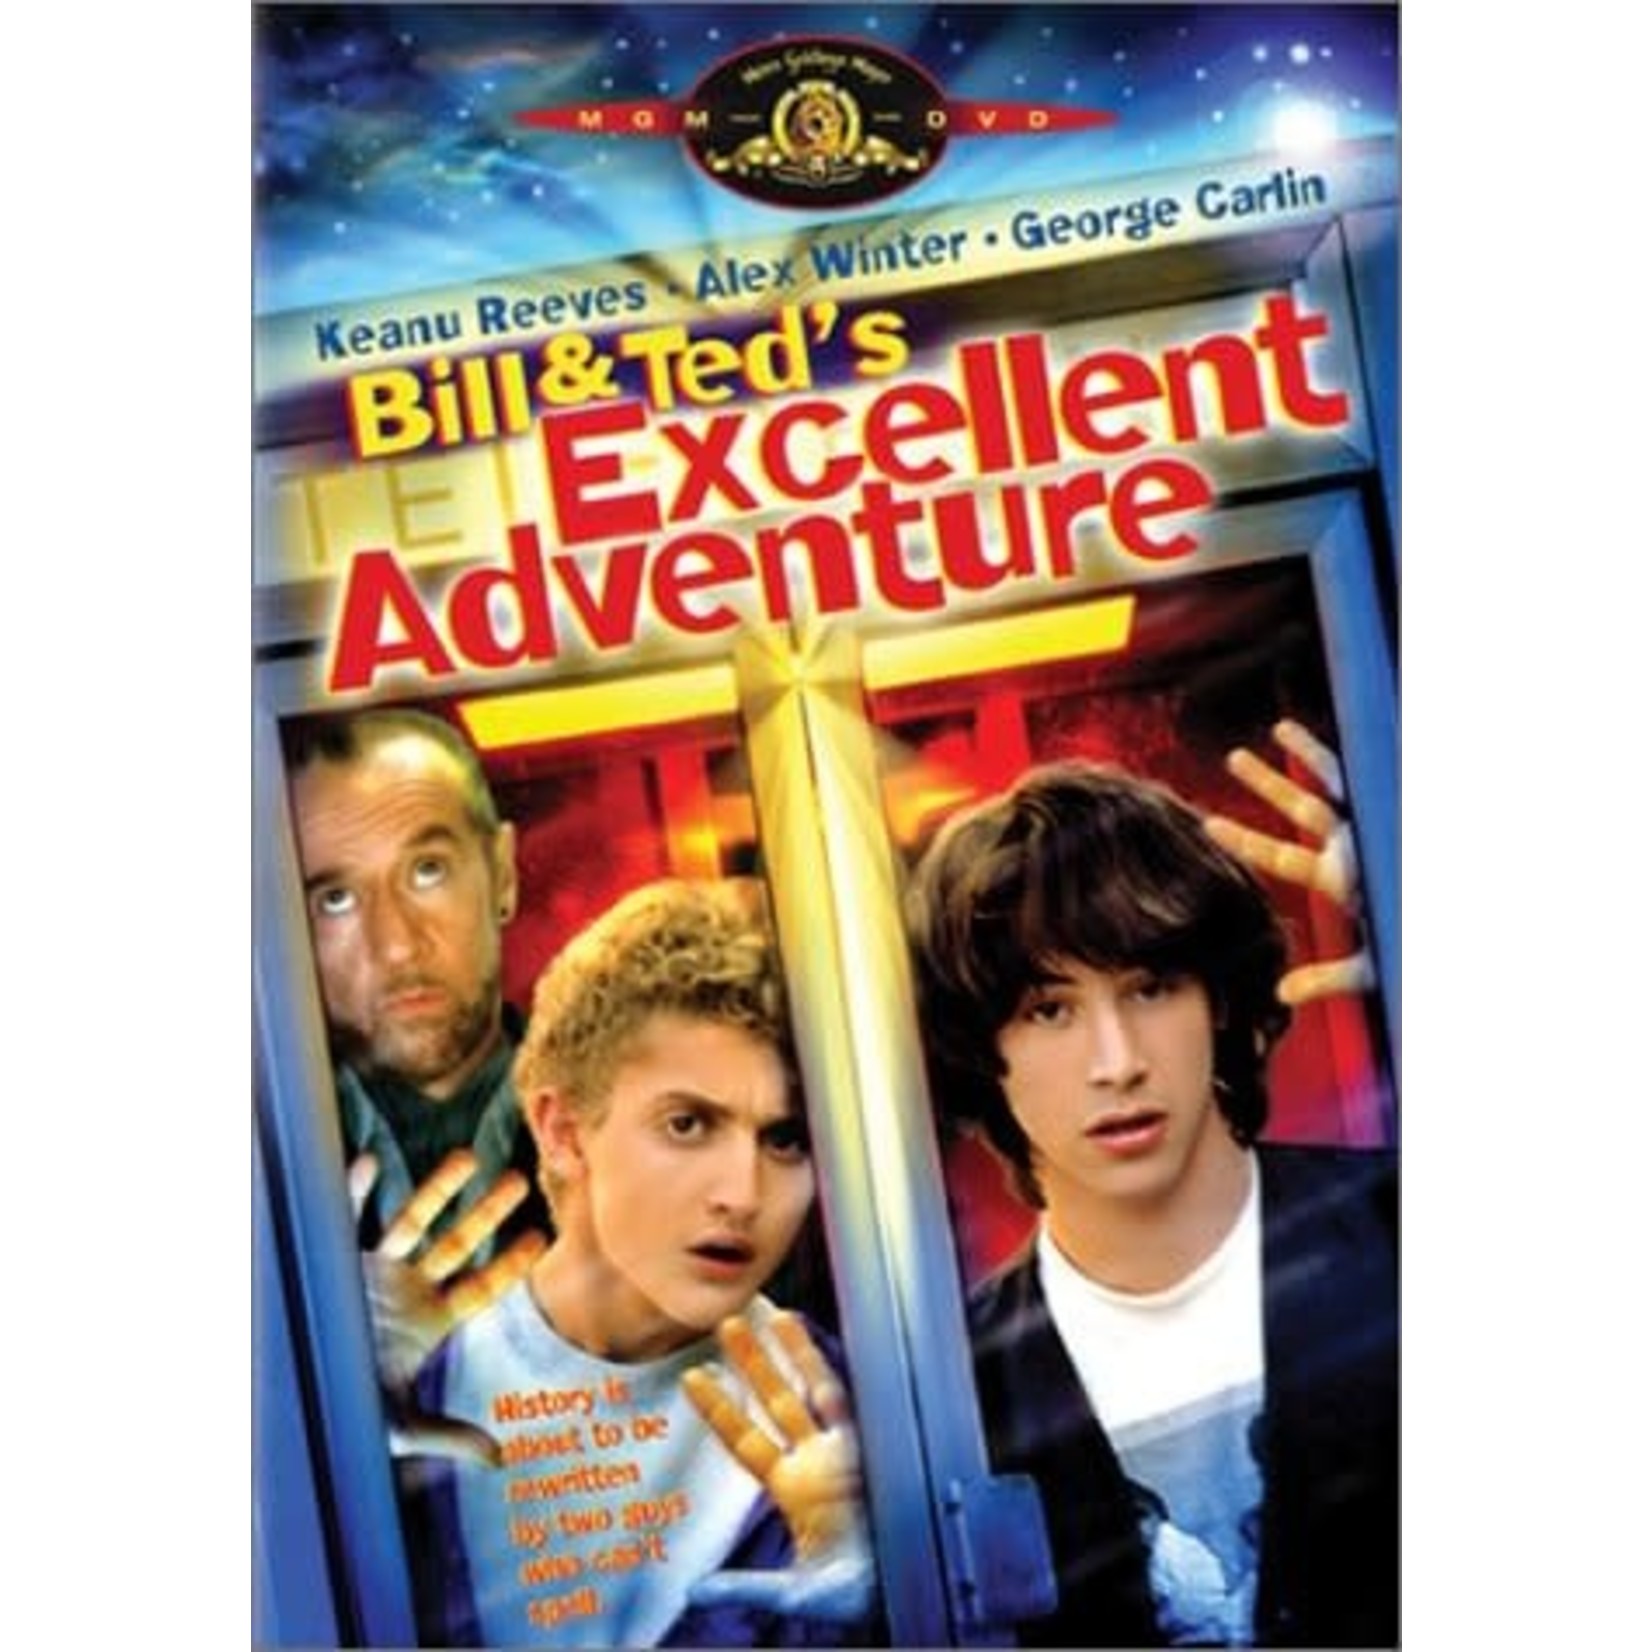 Bill & Ted's Excellent Adventure (1989) [USED DVD]